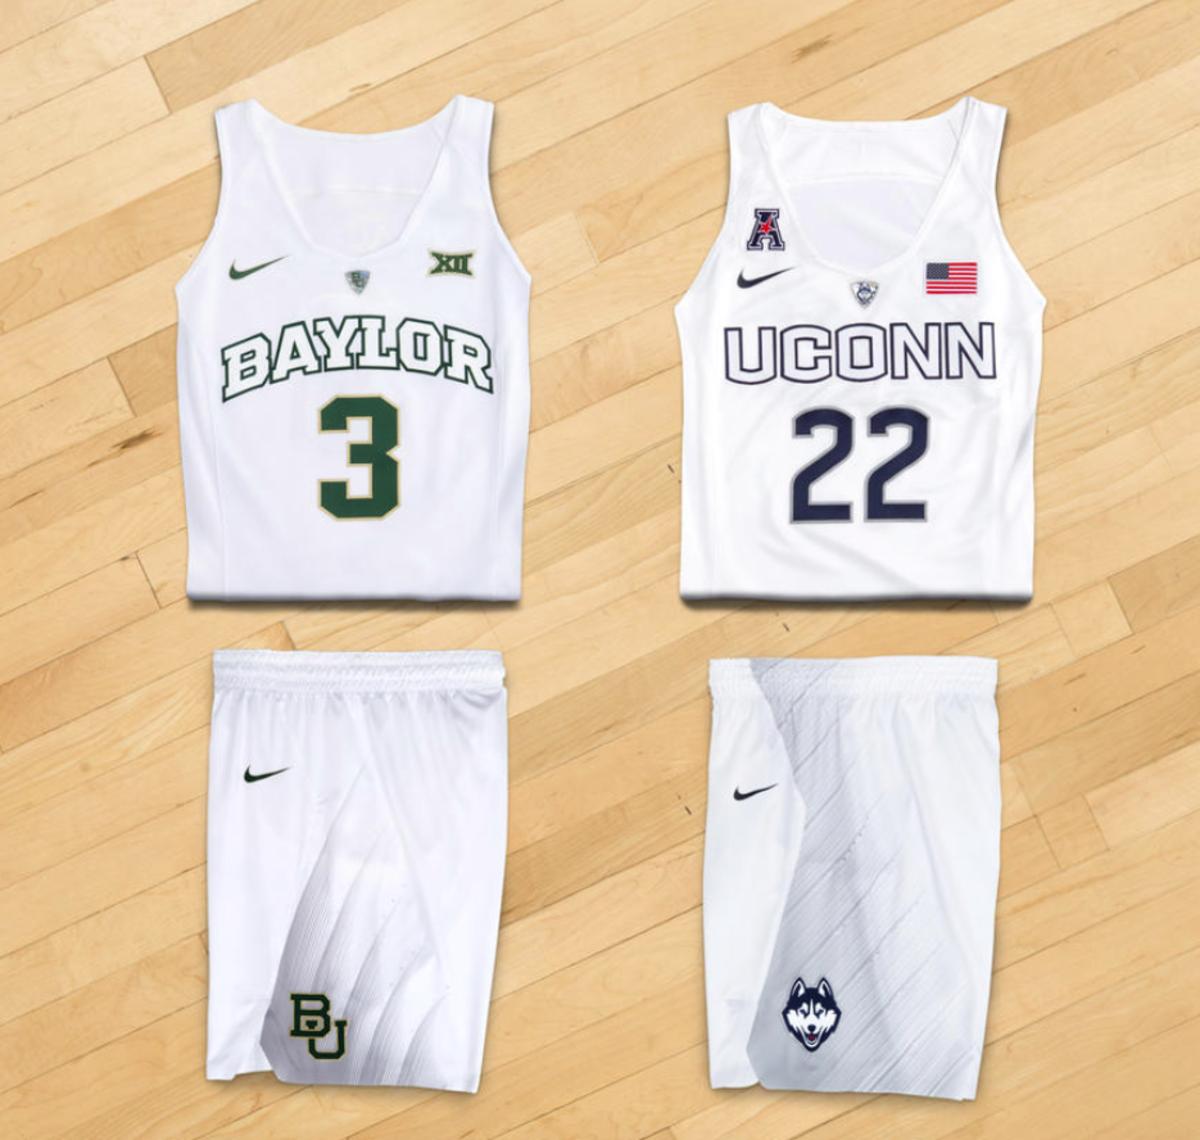 New Nike college basketball uniforms - Sports Illustrated